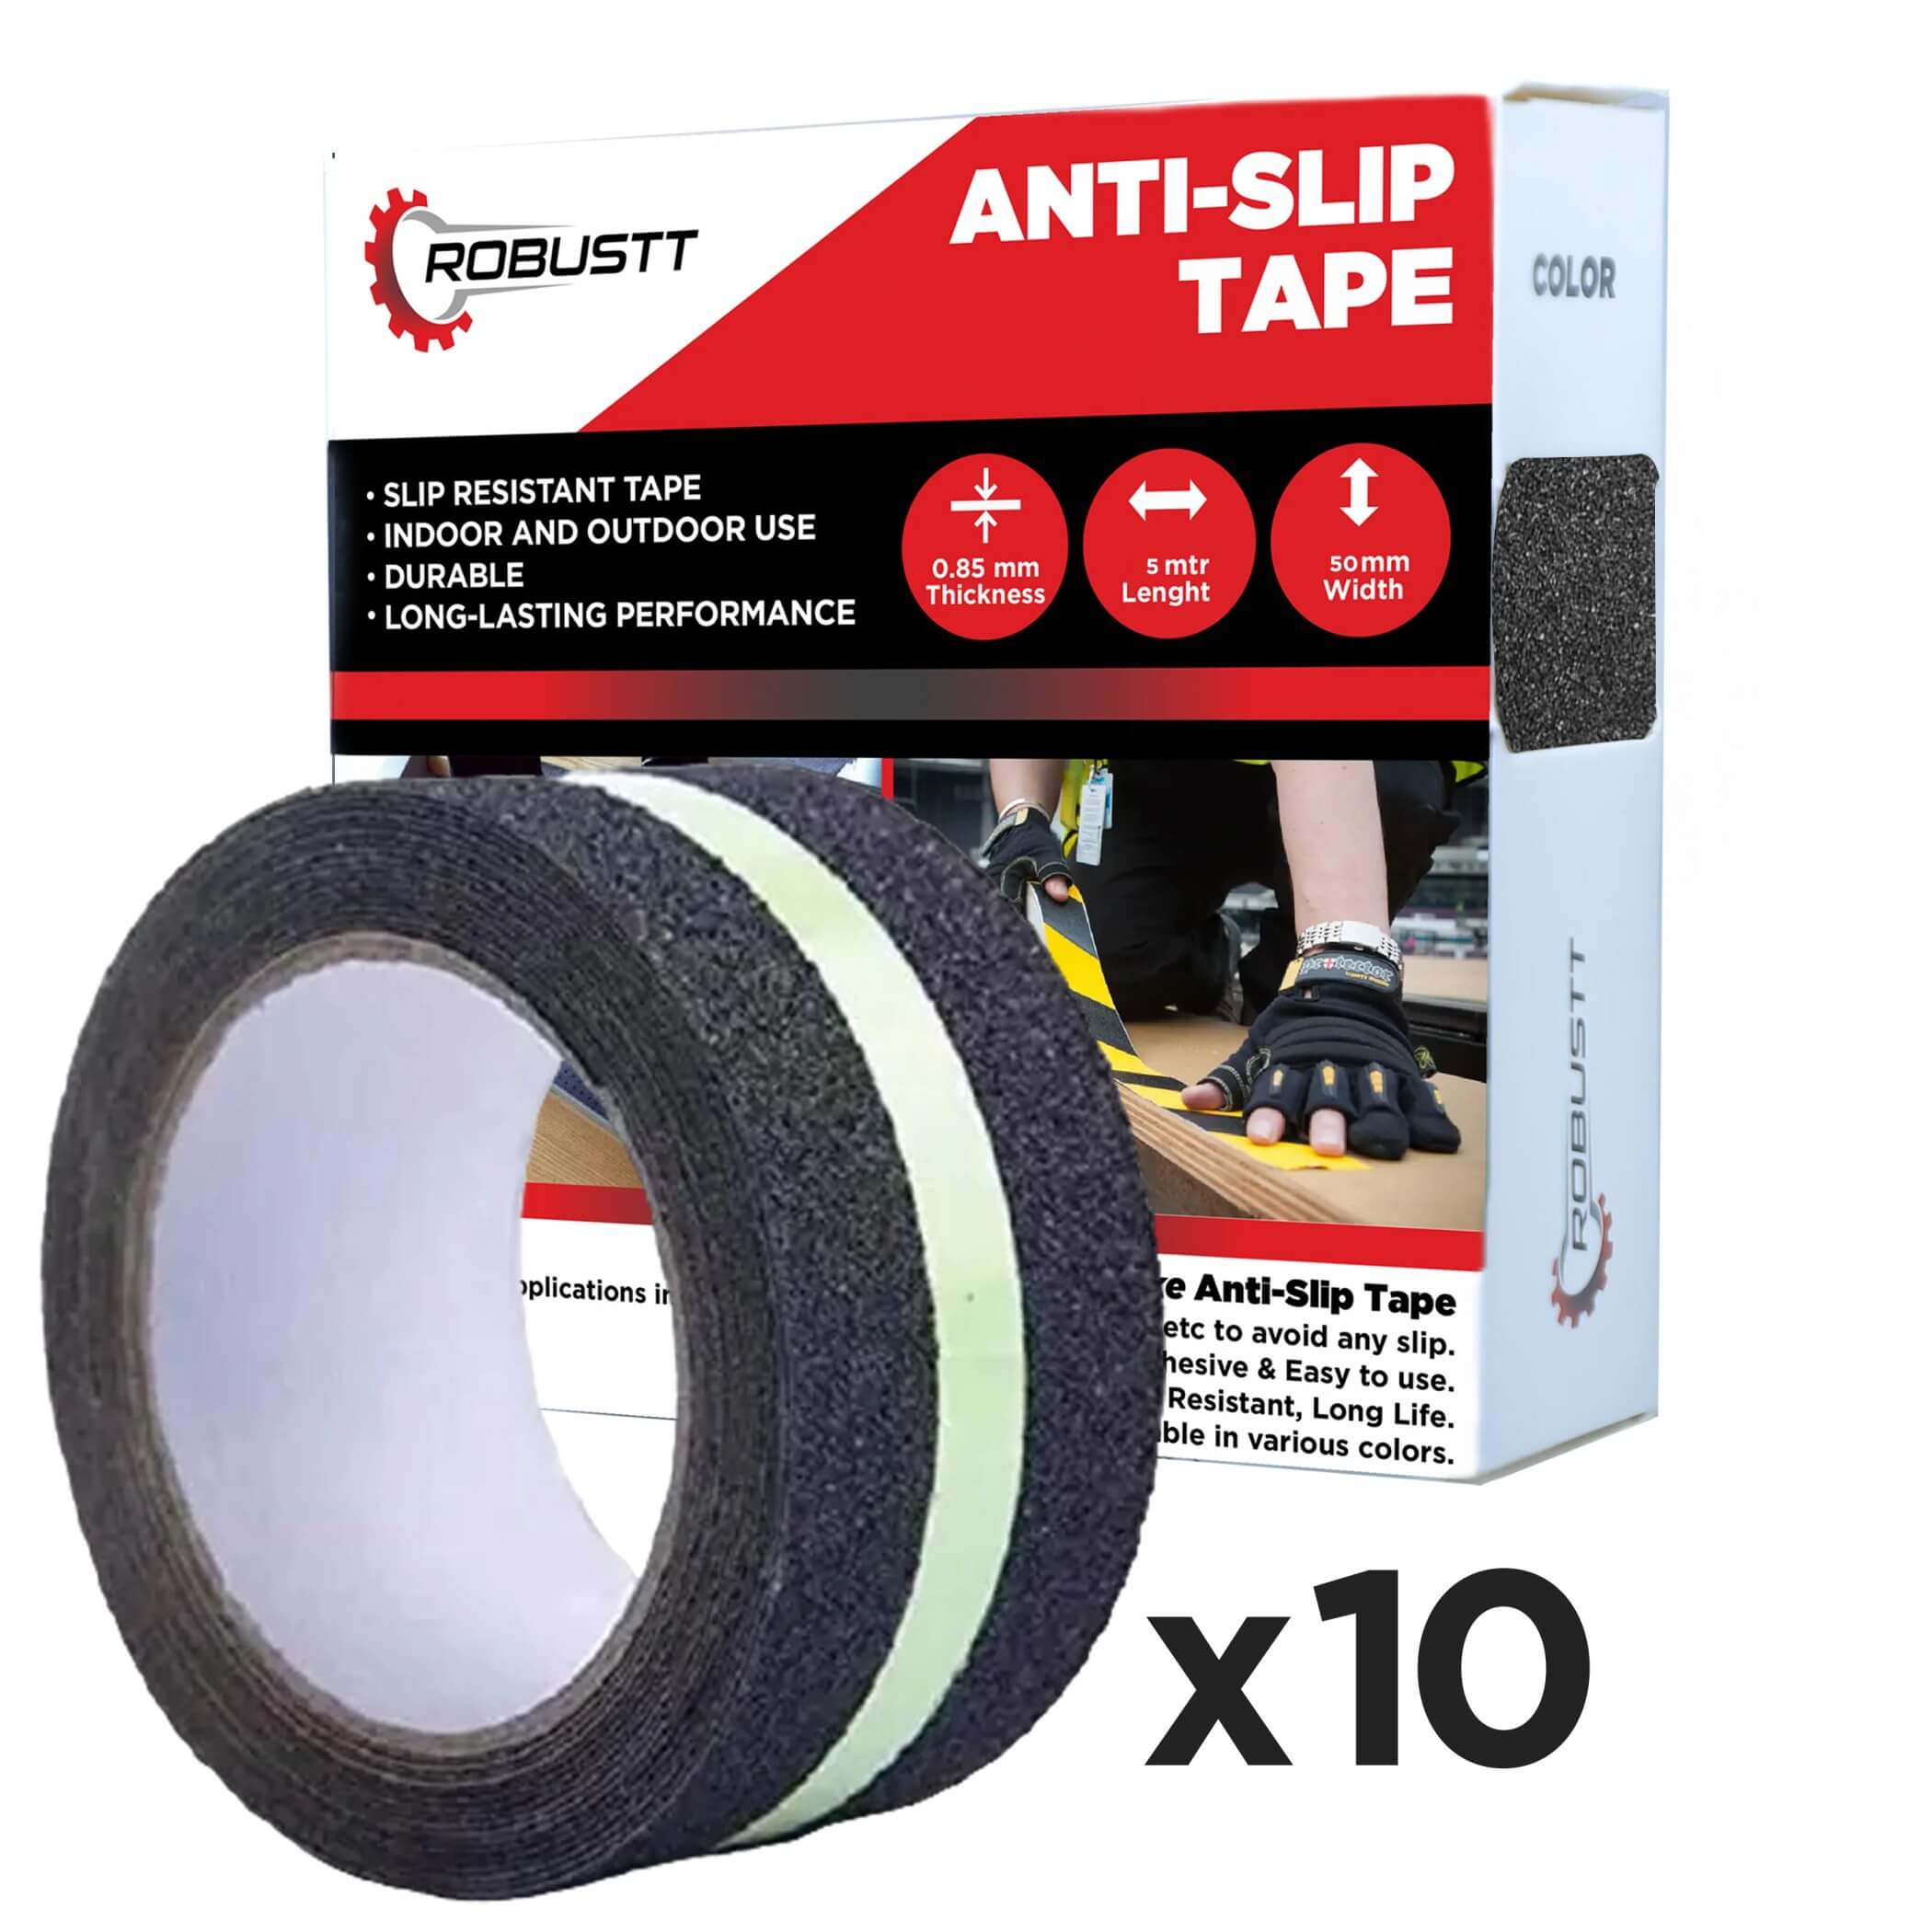 robustt-anti-skid-antislip-5mtr-guaranteed-x50mm-neon-fall-resistant-with-pet-material-and-solvent-acrylic-adhesive-tape-pack-of-10